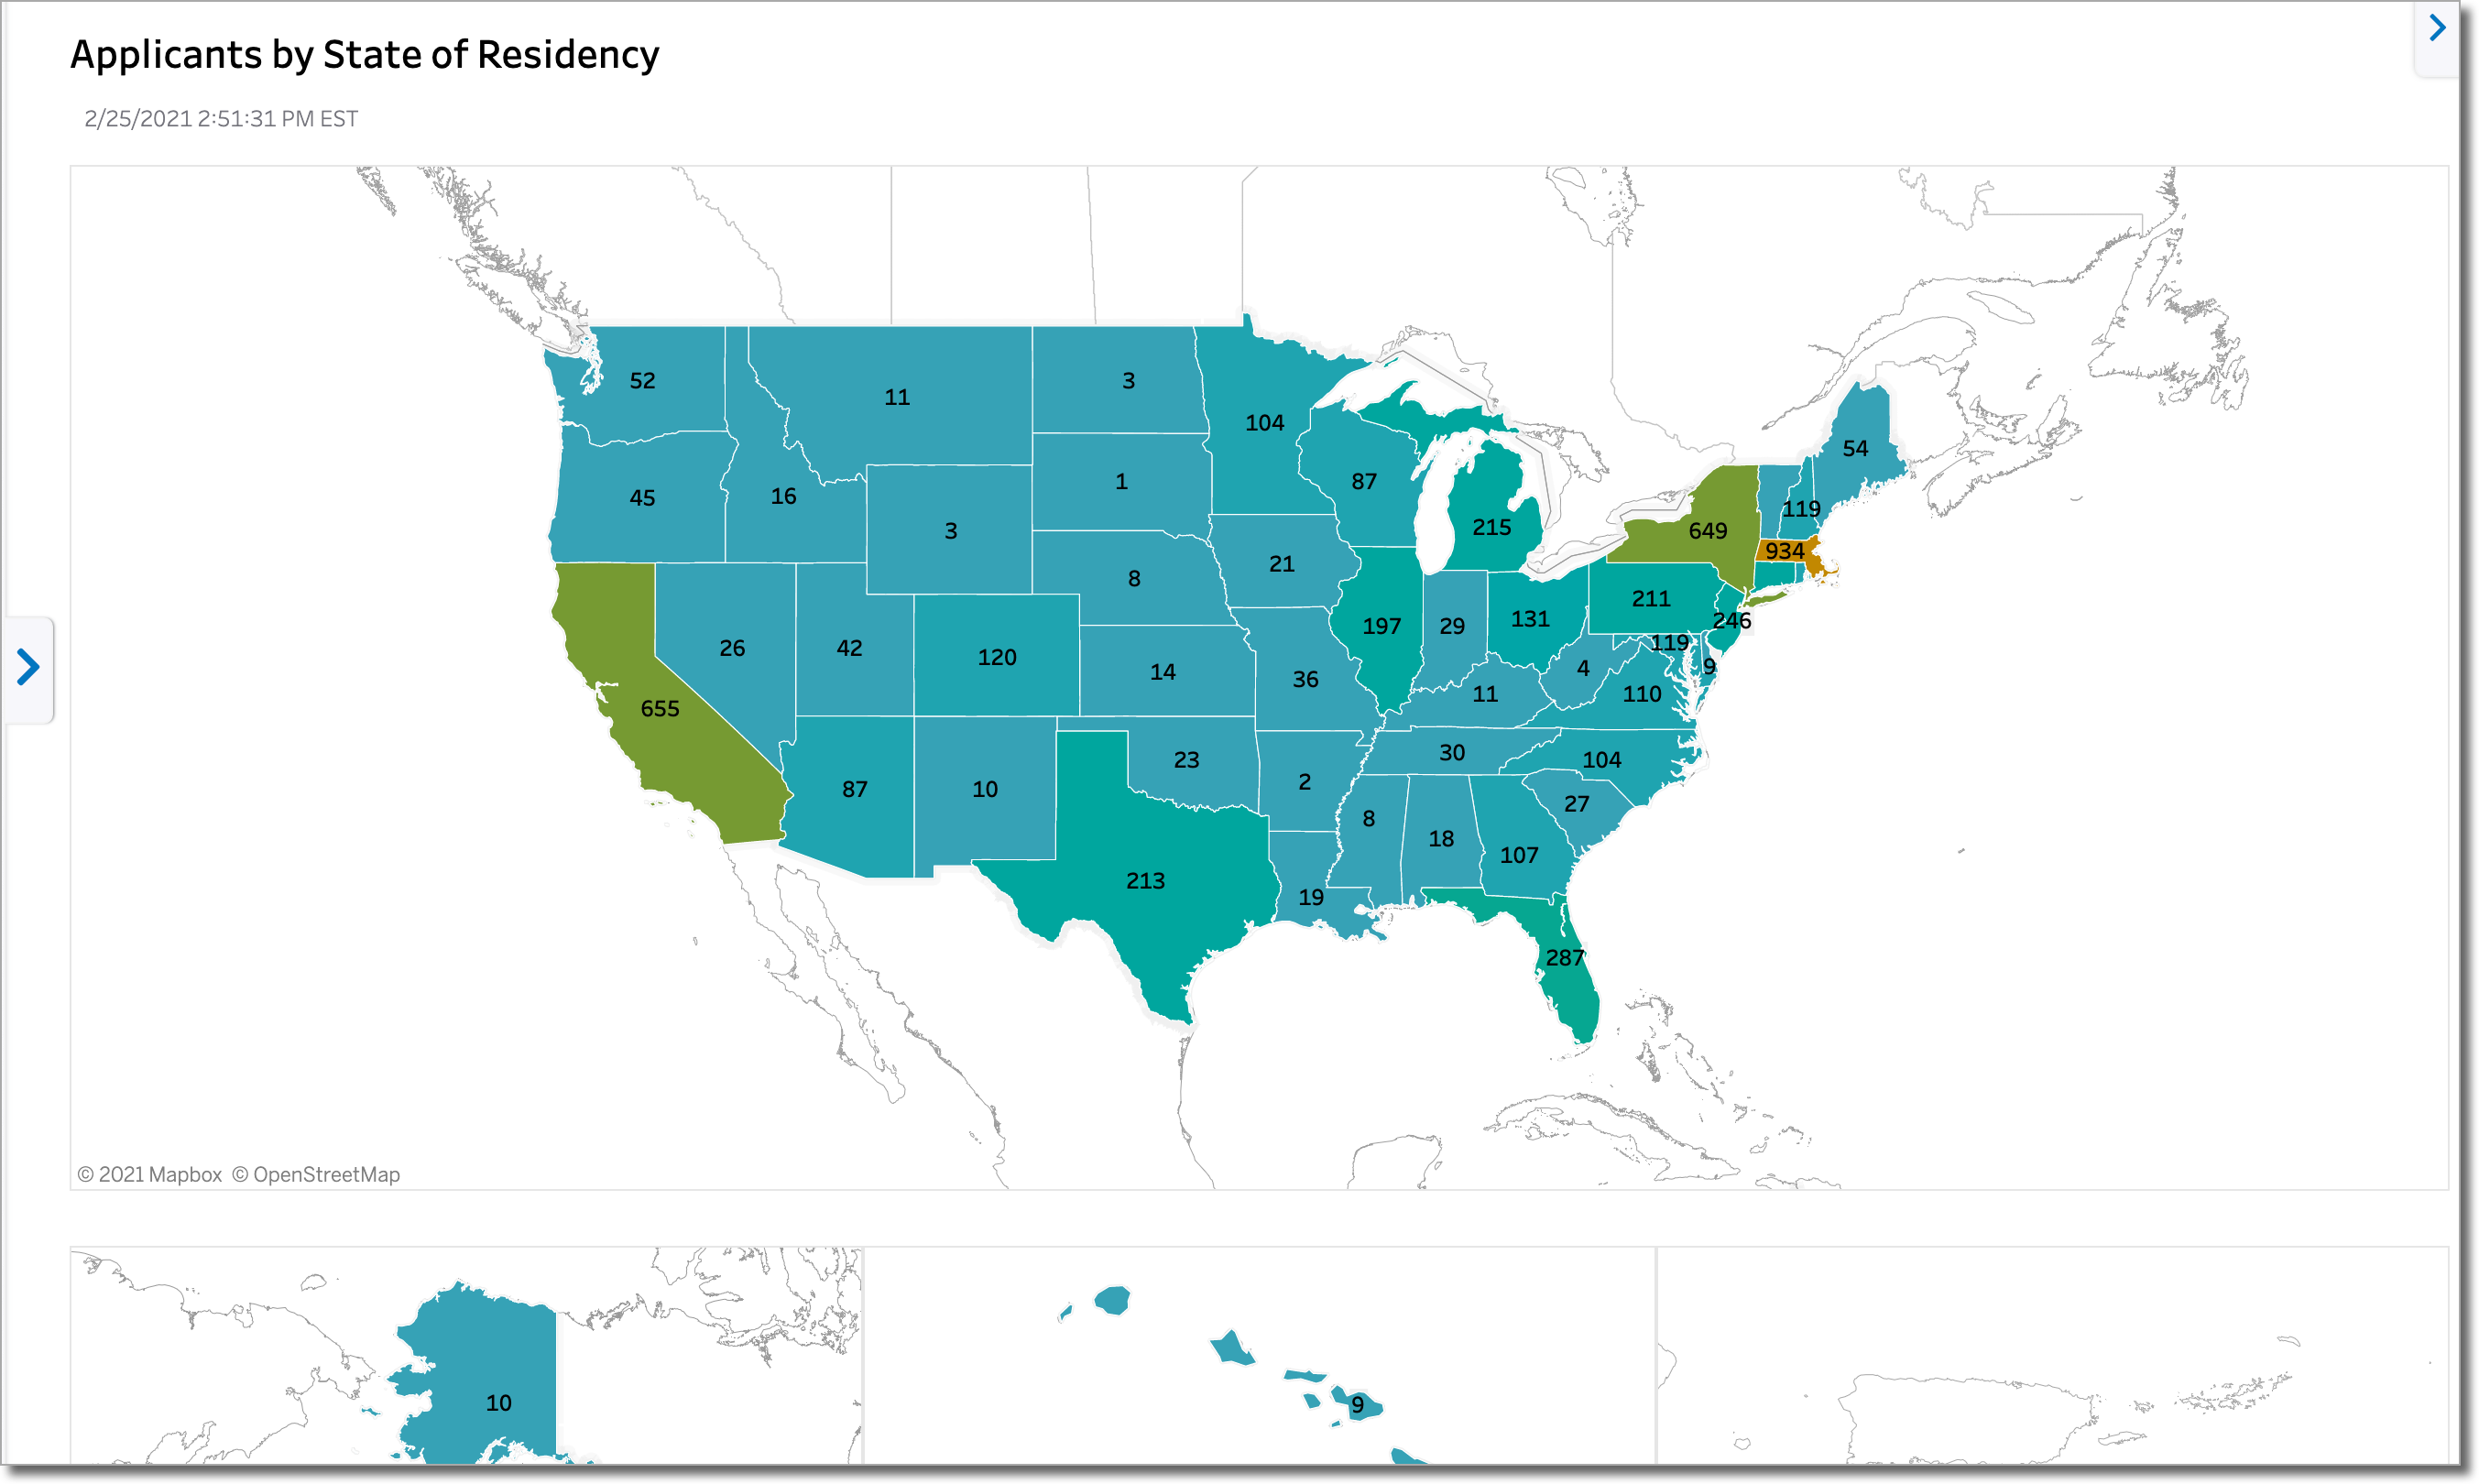 Example of an Applicants by State of Residency dashboard showing a color-coded map of the United States and the number of applicants per state